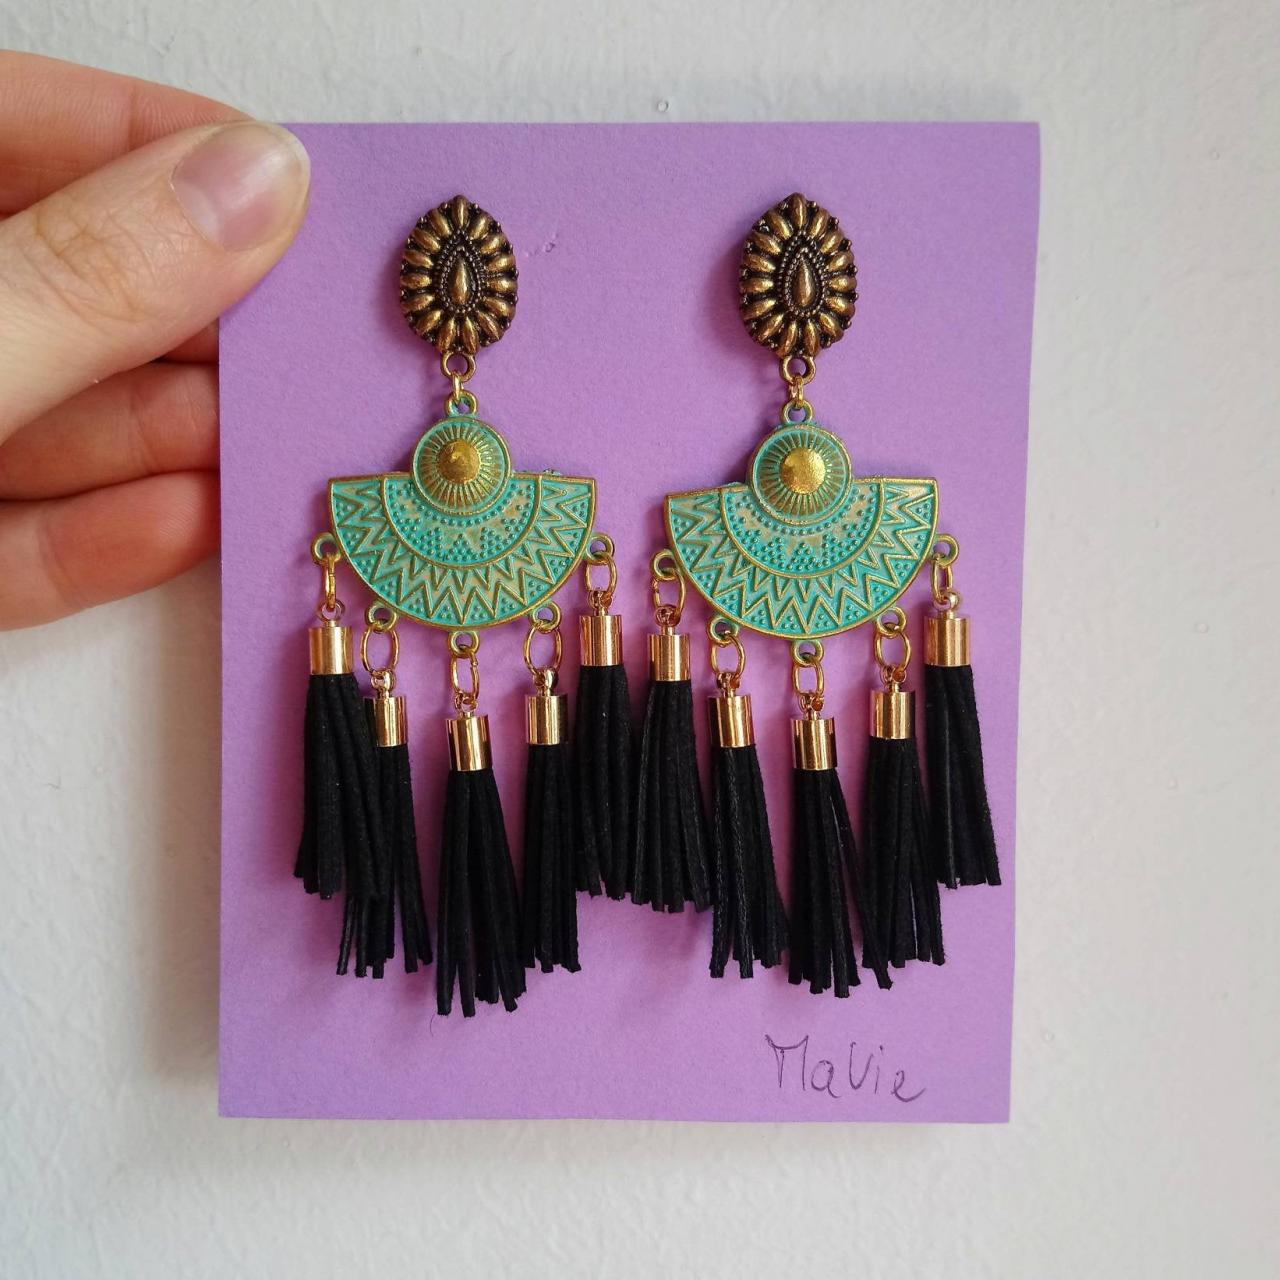 Distinctive Ethnic Pendant Earrings Particular Green Glossy Oriental Style In Golden Brass With Black Tassels In 3 Cm Leather And Lobe Closure